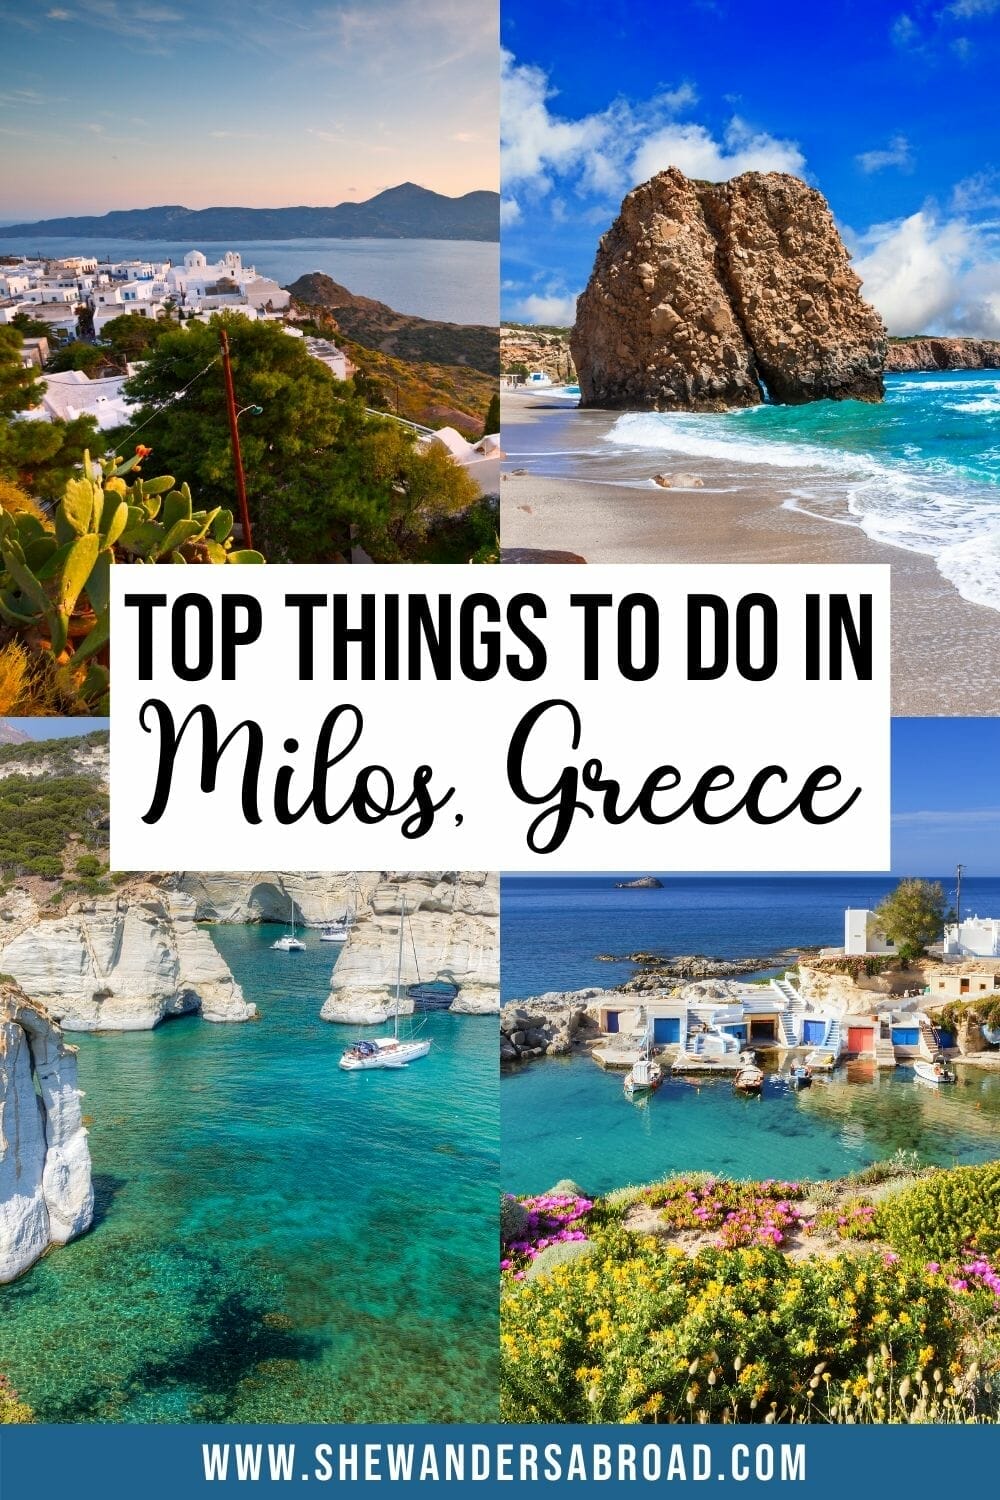 8 TOP THINGS TO DO IN MILOS